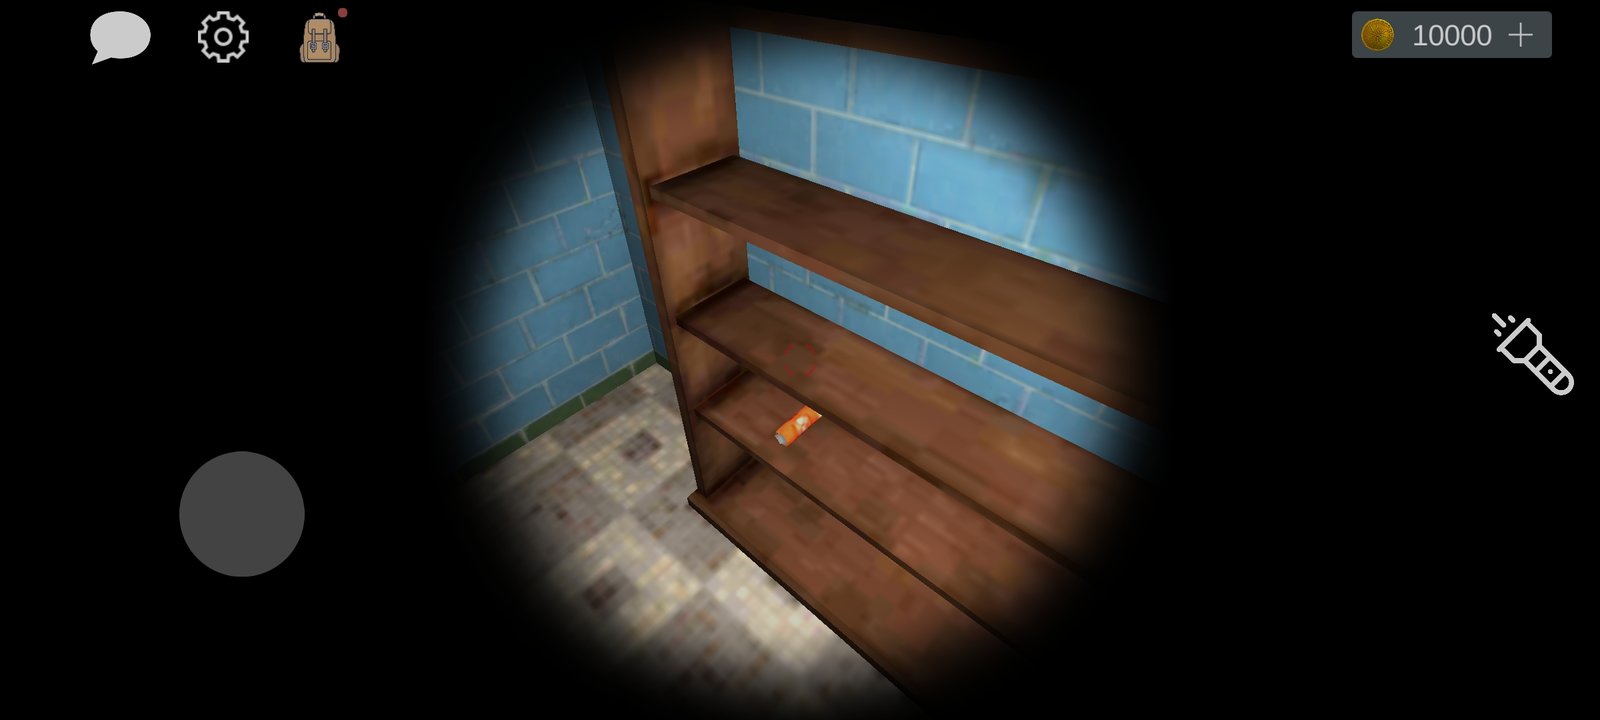 Eyes Horror & Coop Multiplayer v7.0.64 MOD APK -  - Android &  iOS MODs, Mobile Games & Apps